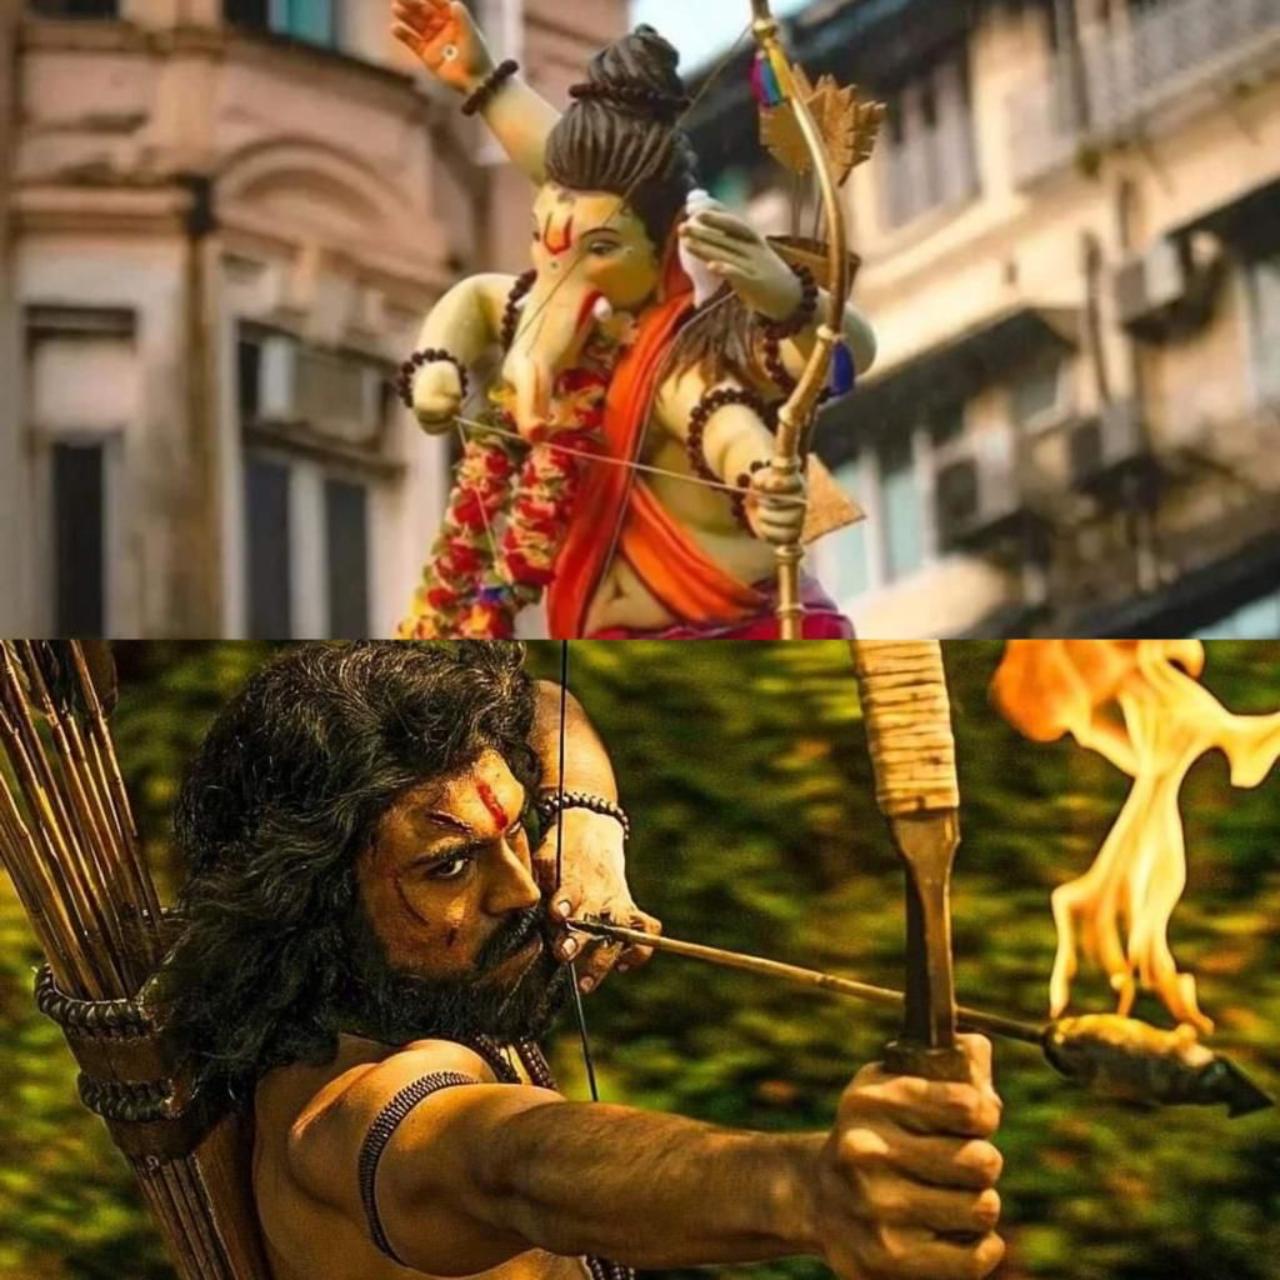 It is safe to say, we all should be prepared to be amazed with Bow and Arrow, Alluri Sitarama Raju Ganeshas this year